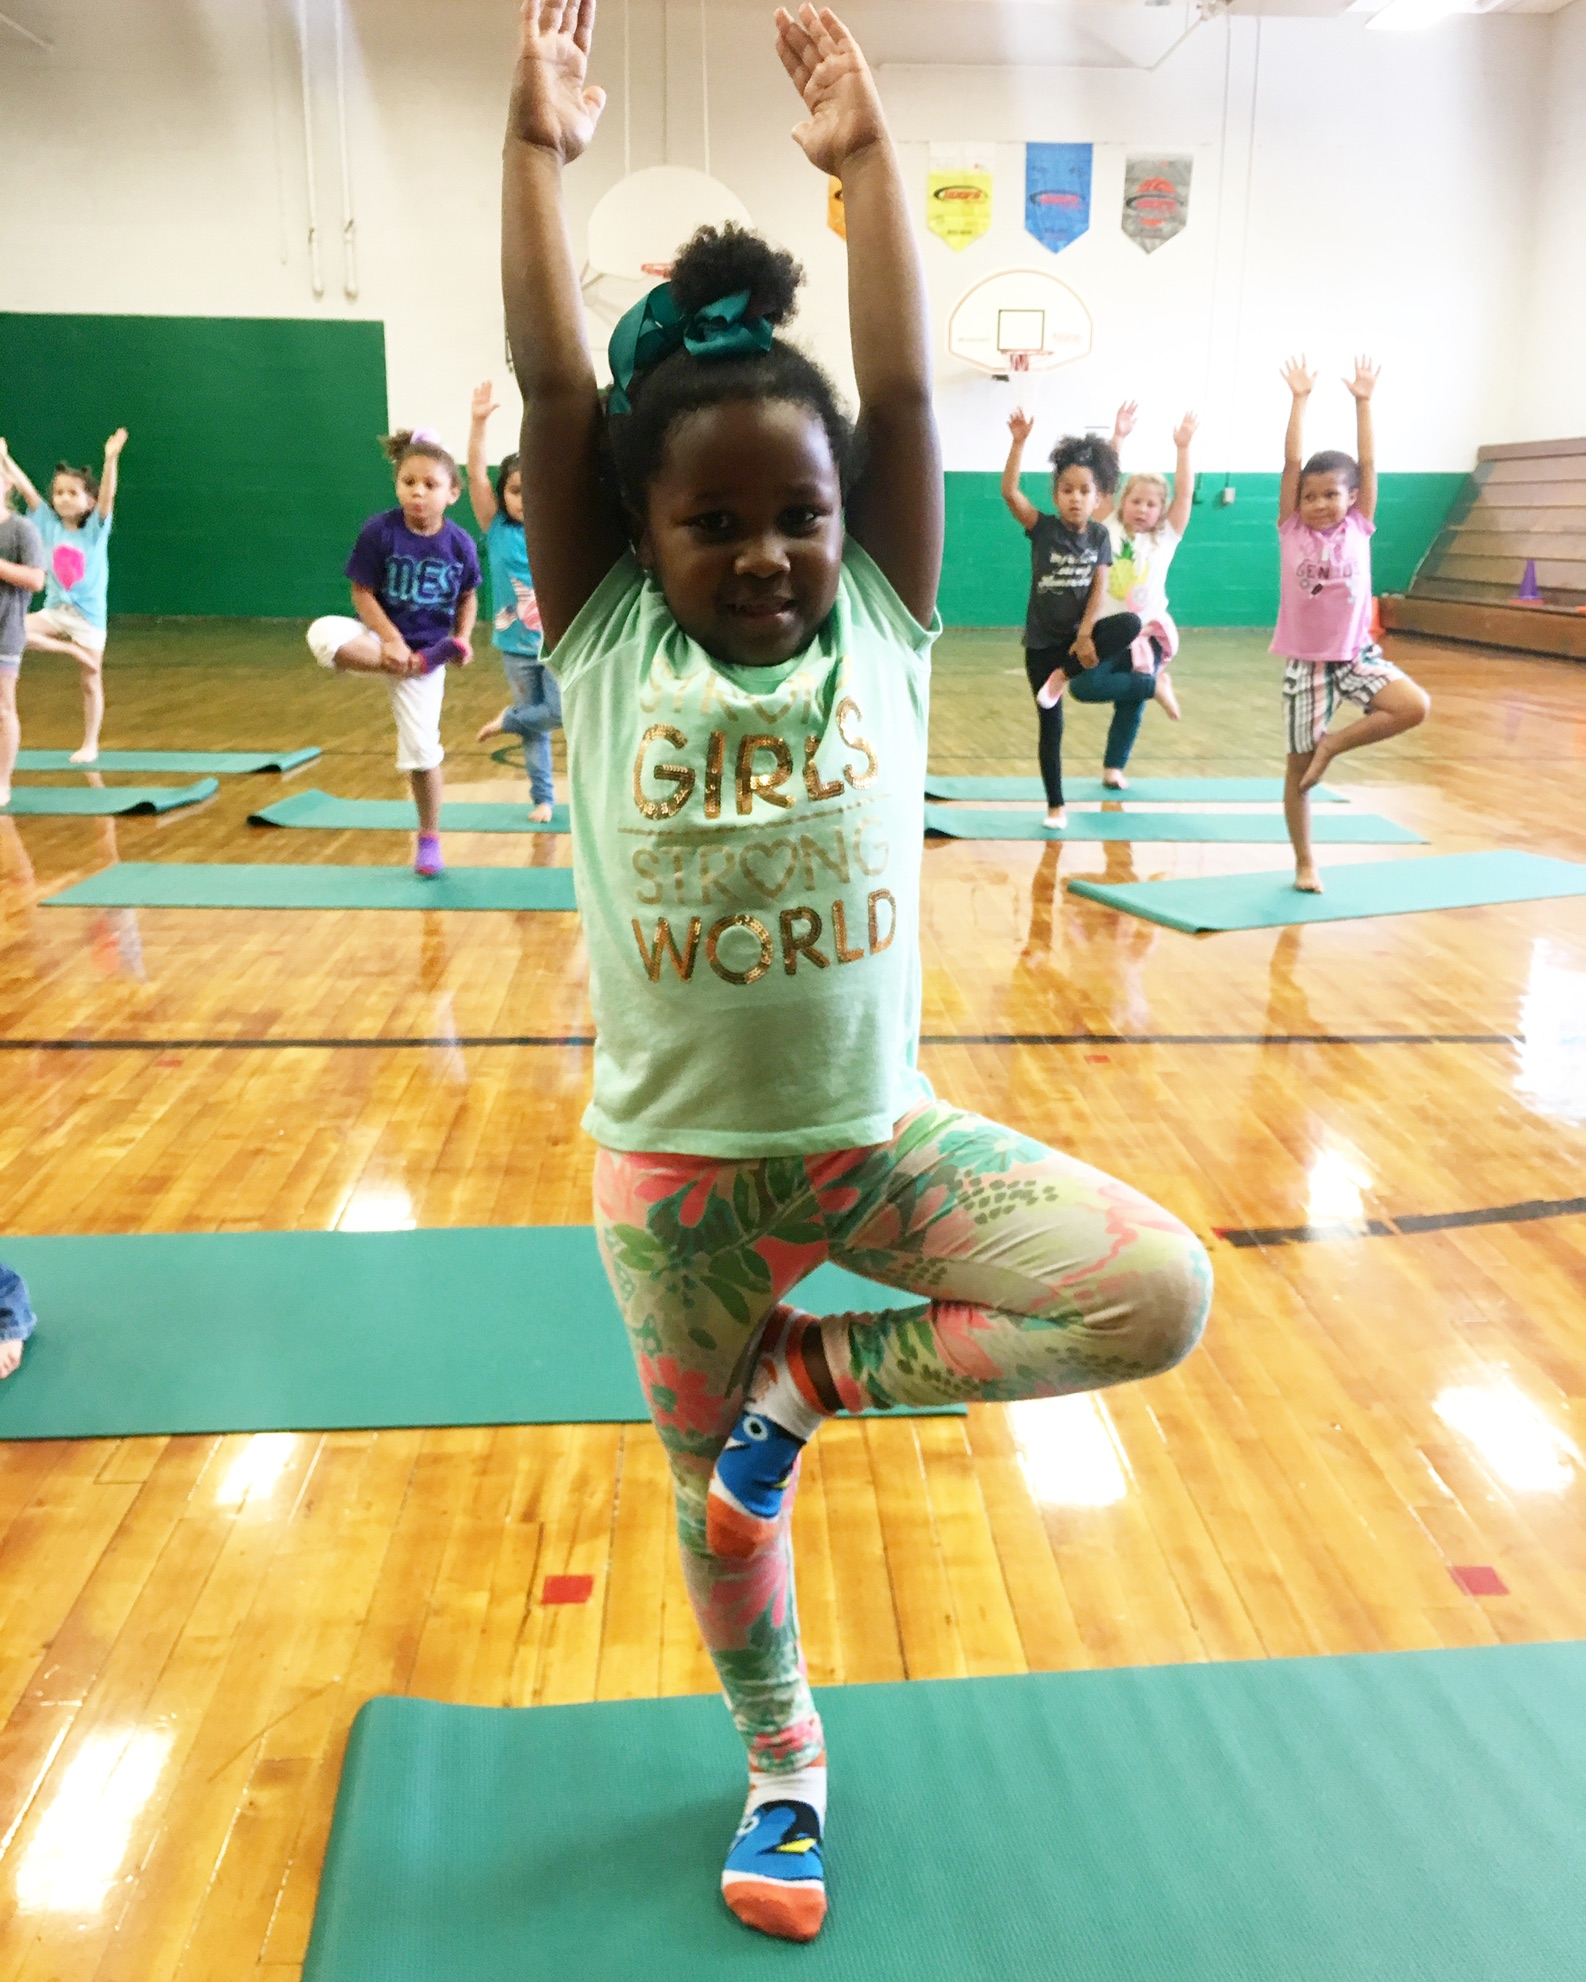 Yoga Gifts for 5-Year-Olds - Kids Yoga Stories